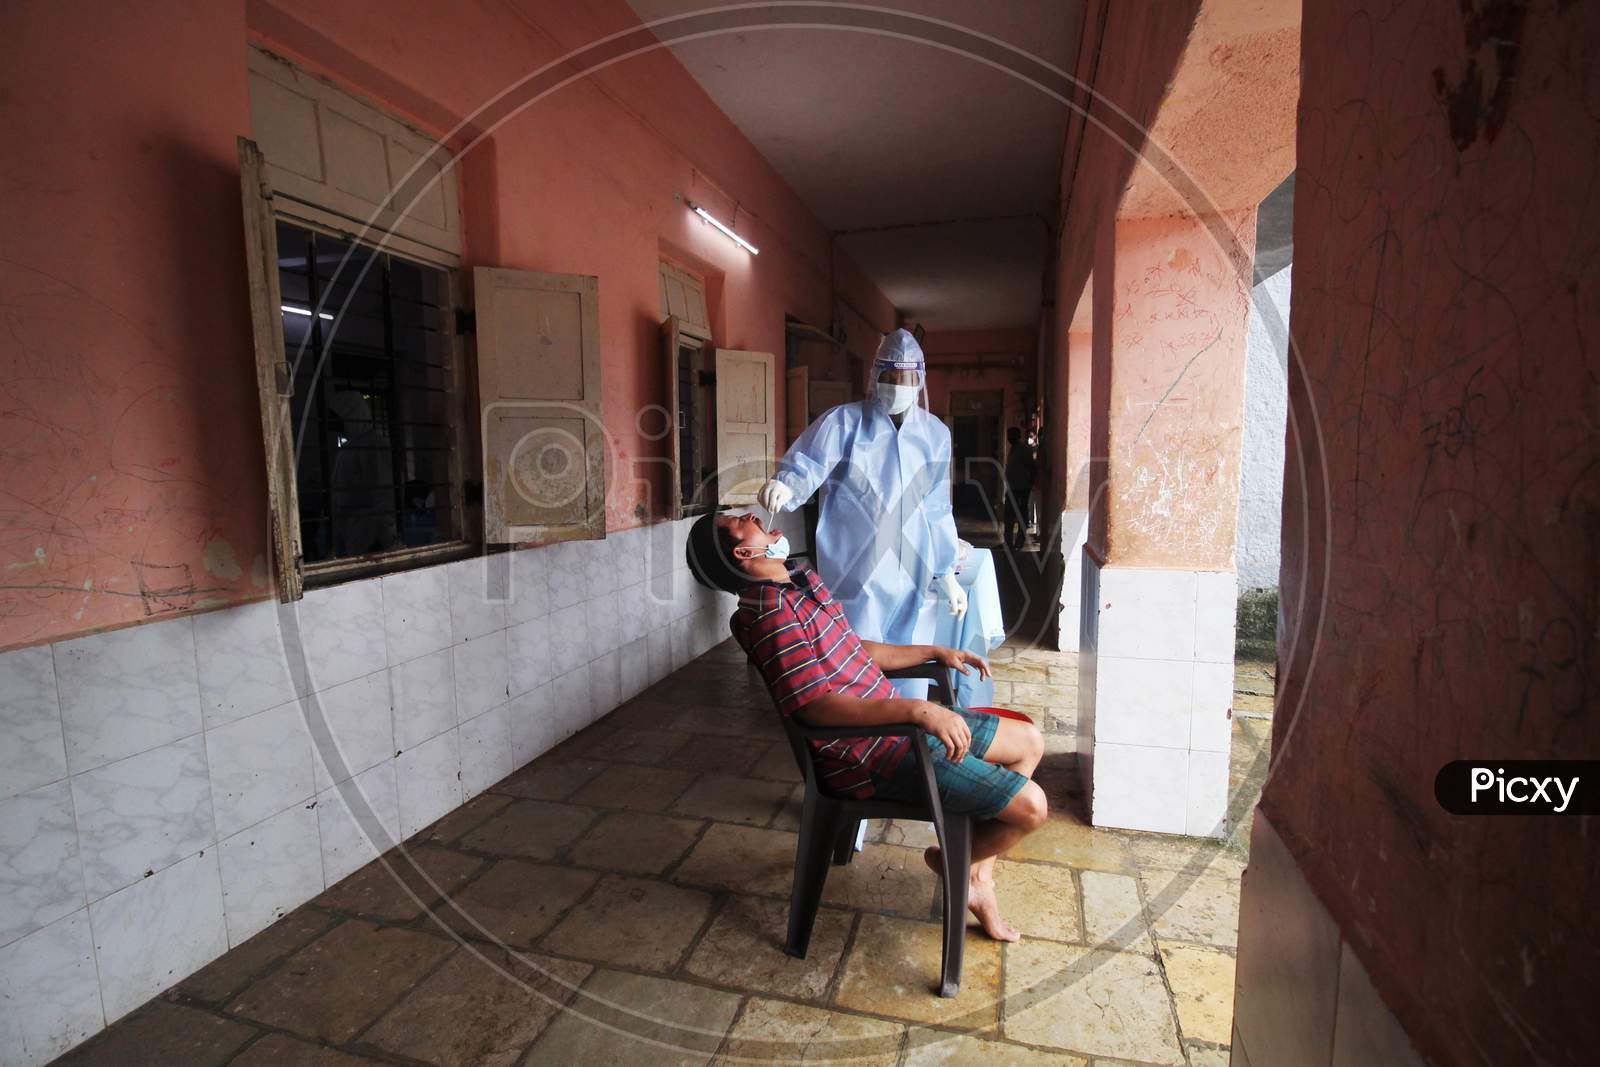 A healthcare worker wearing personal protective equipment (PPE) collects a swab sample from a man during a check-up campaign for the coronavirus disease (COVID-19), in Mumbai, India on July 28, 2020.